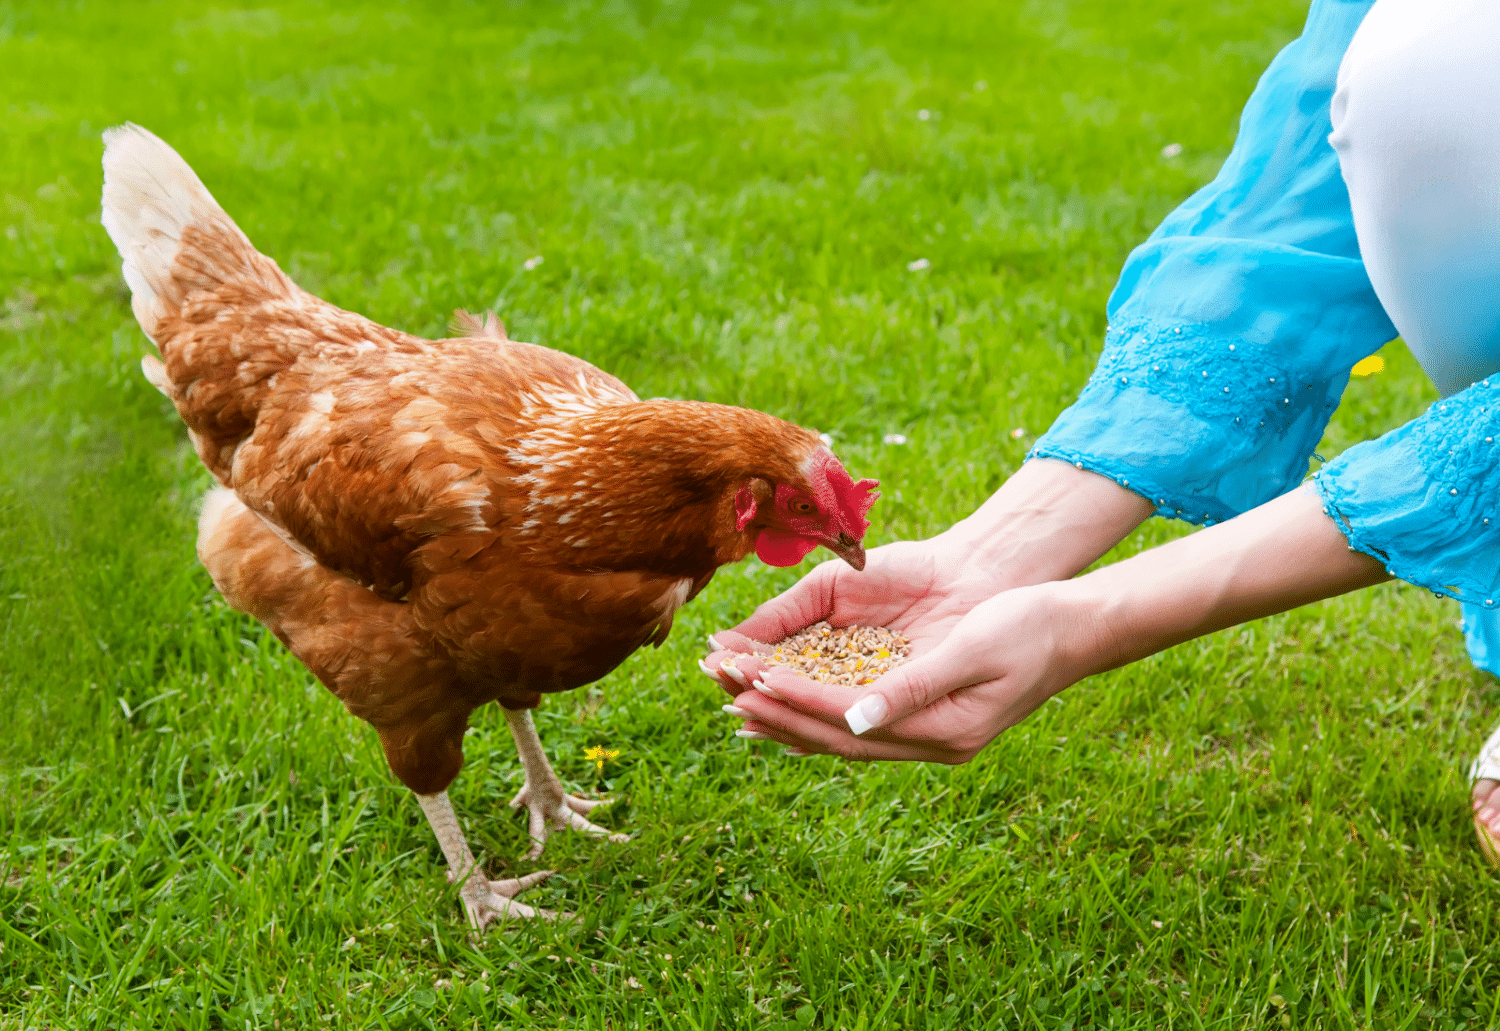 what should feed my laying chickens in missouri